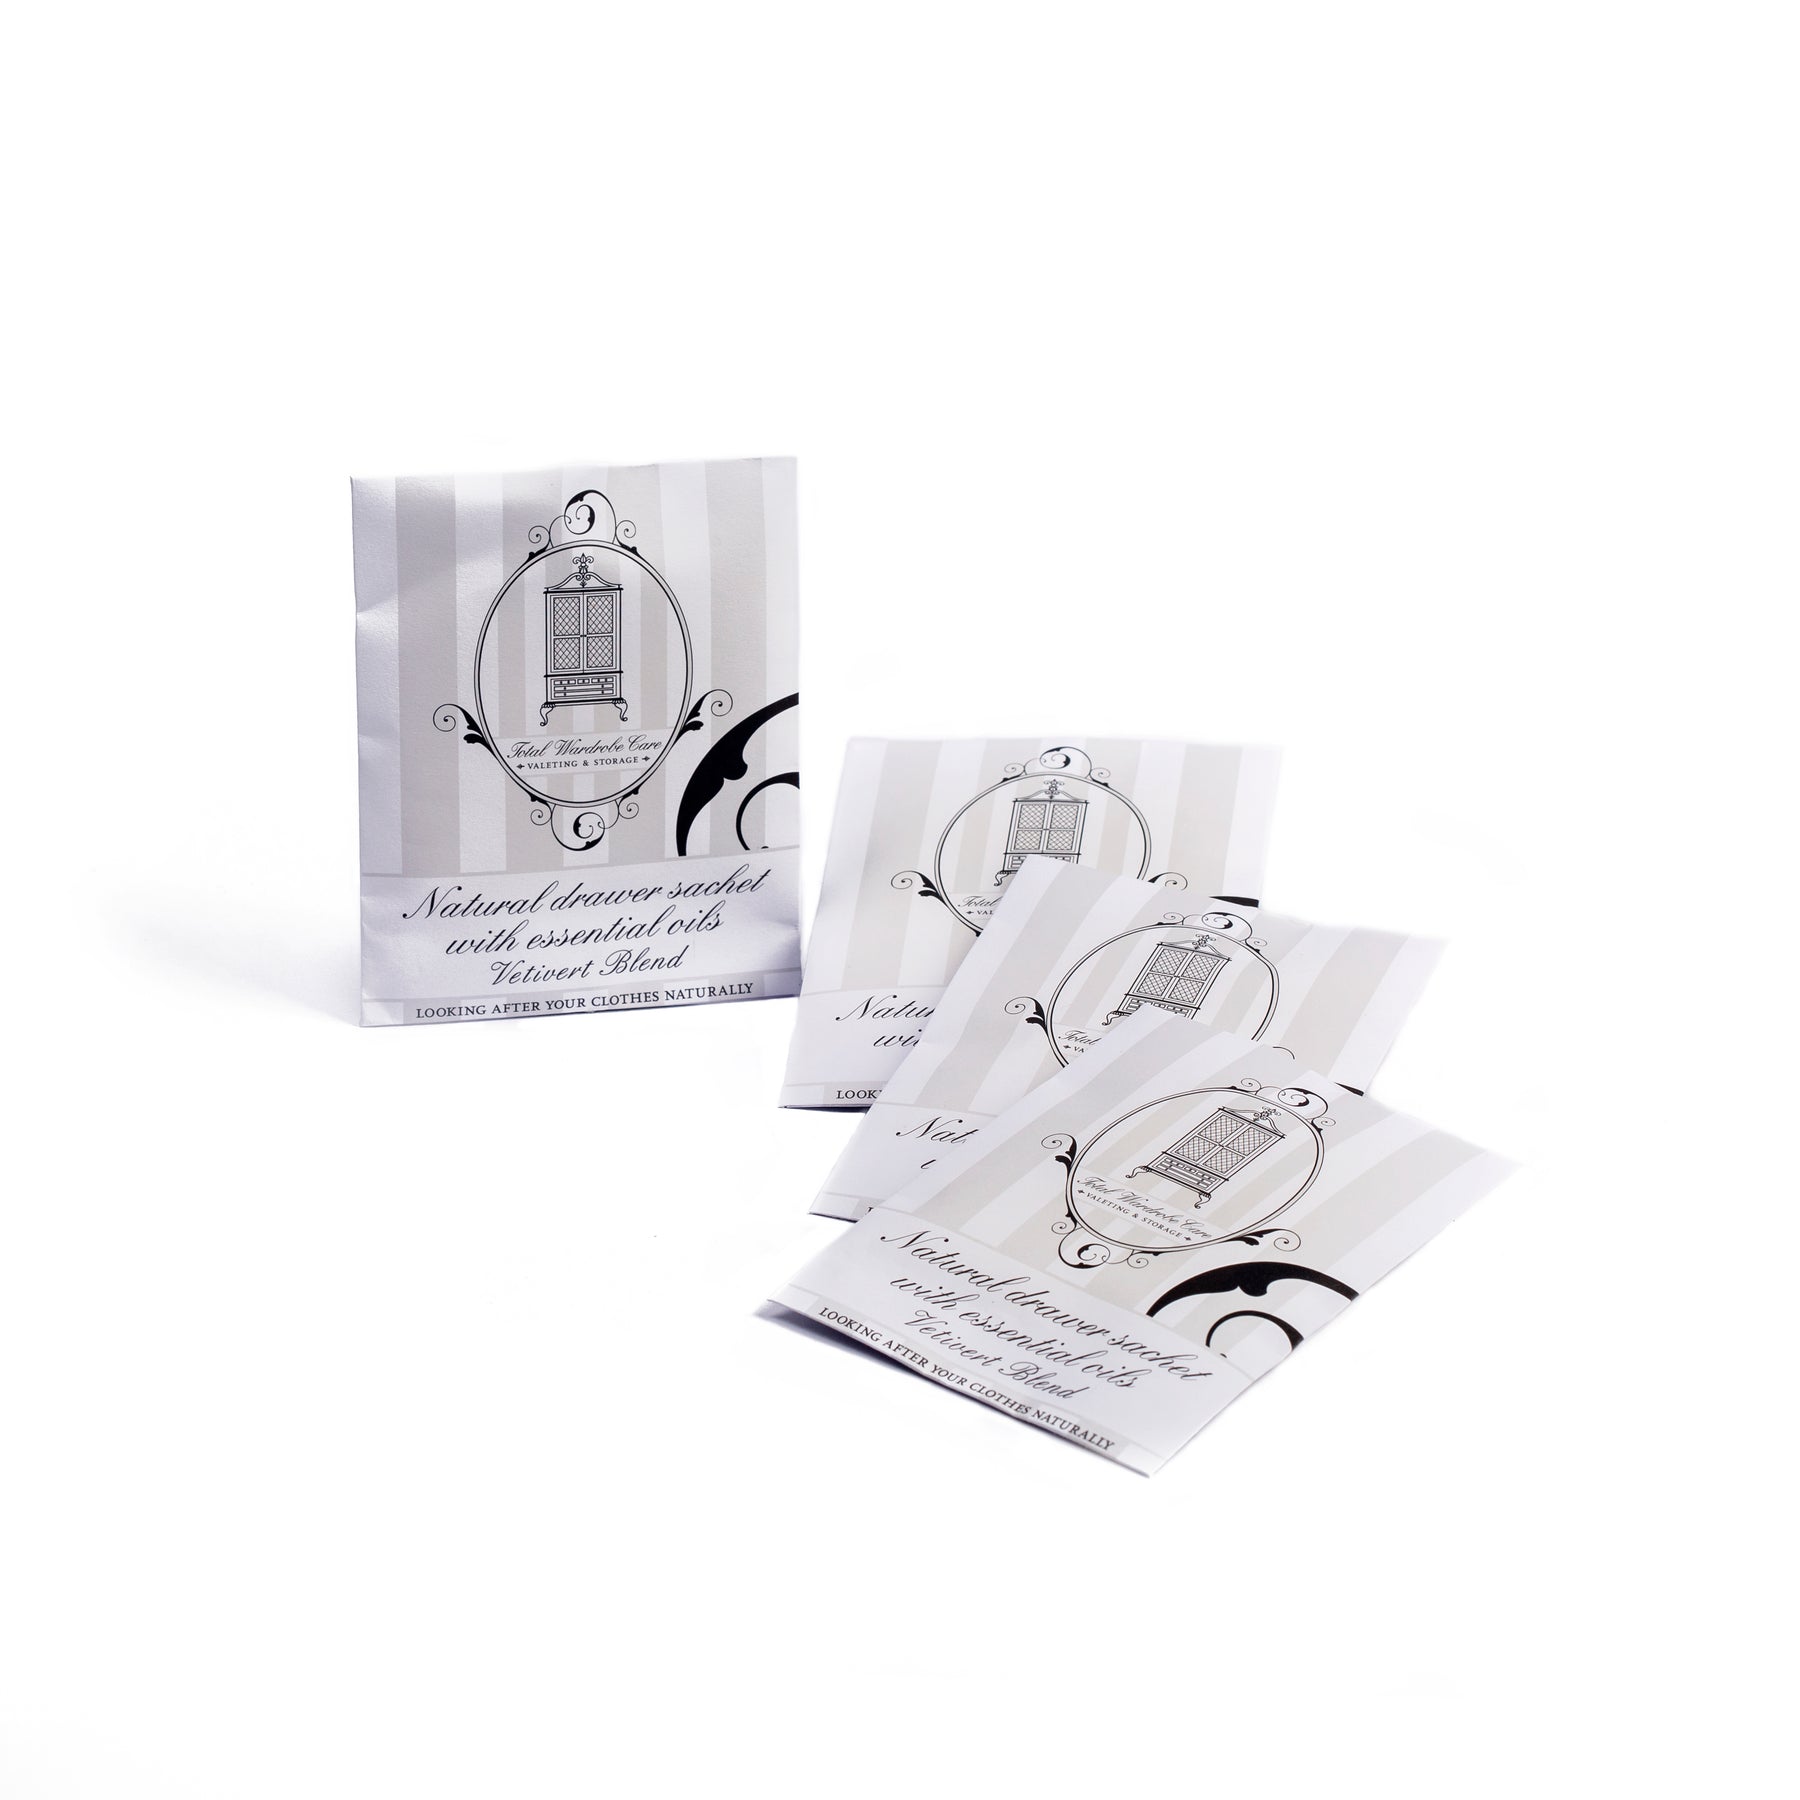 Anti-moth drawer sachets with vetivert essential oils